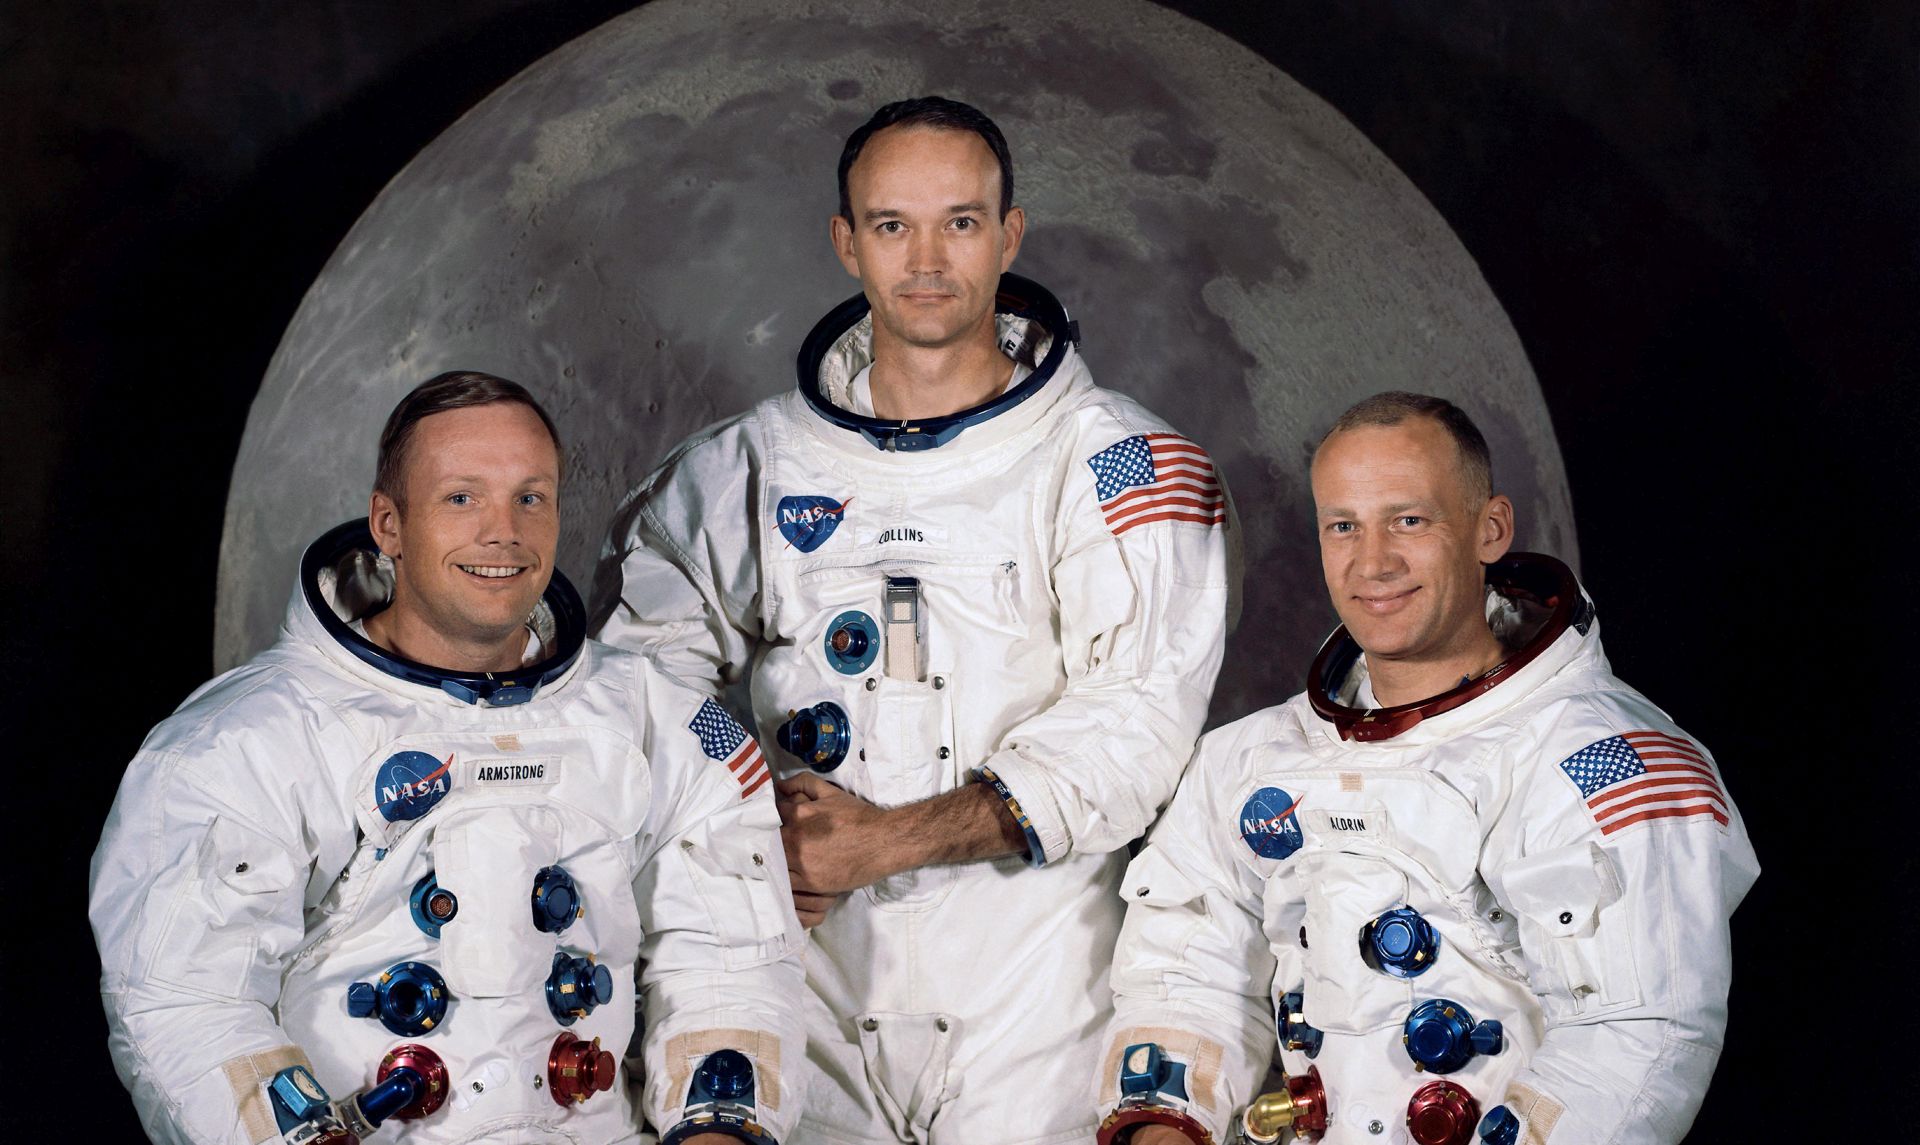 epa07672252 An undated handout photo made available by the National Aeronautics and Space Administration (NASA) shows the 'Apollo 11 lunar landing mission crew with (L-R) mission commander Neil A. Armstrong, command module pilot Michael Collins and lunar module pilot Edwin E. Aldrin Jr. posing in their space suits (issued 25 June 2019).
The year 2019 marks the 50th anniversary of the first moon landing, an event seen as the peak of the United States' space program of the 1960s which put an end to the so-called 'Race to Space' between the Cold War rivals the US and the Soviet Union, that once was triggered by the USSR's 04 October 1957 launch of the 'Sputnik 1' satellite. NASA astronaut Neil Armstrong made history when he stepped out of the Apollo 11's 'Eagle' landing module on 21 July 1969 and left the first human footprints on the moon.  EPA/NASA HANDOUT  ATTENTION: For the full PHOTO ESSAY text please see Advisory Notice epa07672247 HANDOUT EDITORIAL USE ONLY/NO SALES